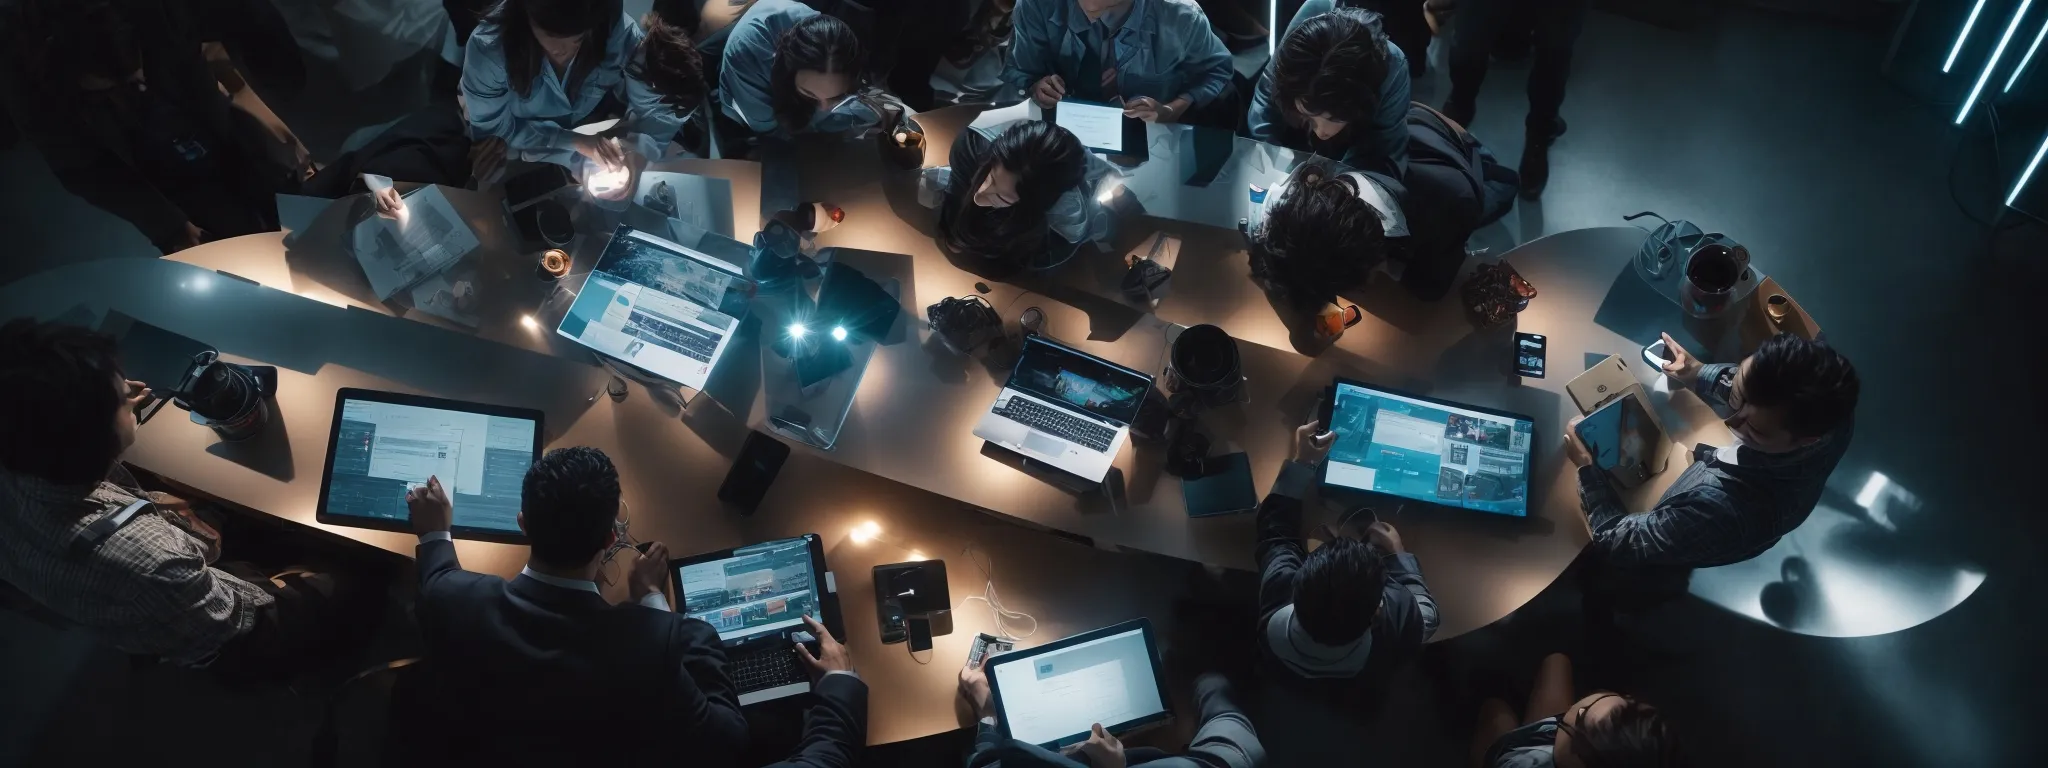 a group of professionals collaborates around a modern, high-tech table strewn with tablets and digital devices under a ceiling with abstract lighting.